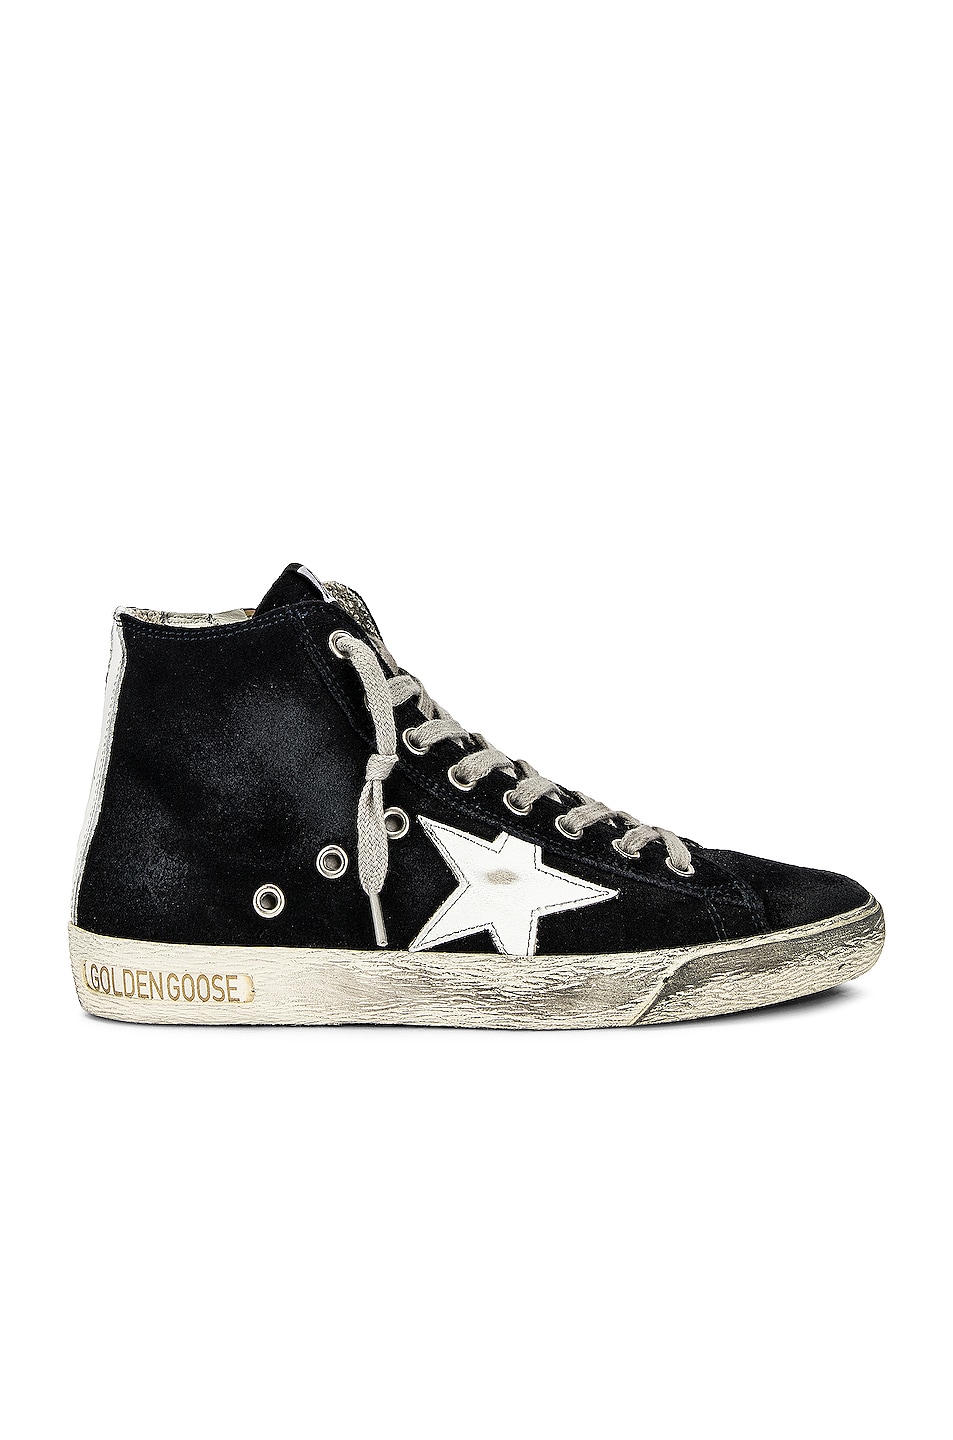 Image 1 of Golden Goose Francy Classic Sneaker in Night Blue & White